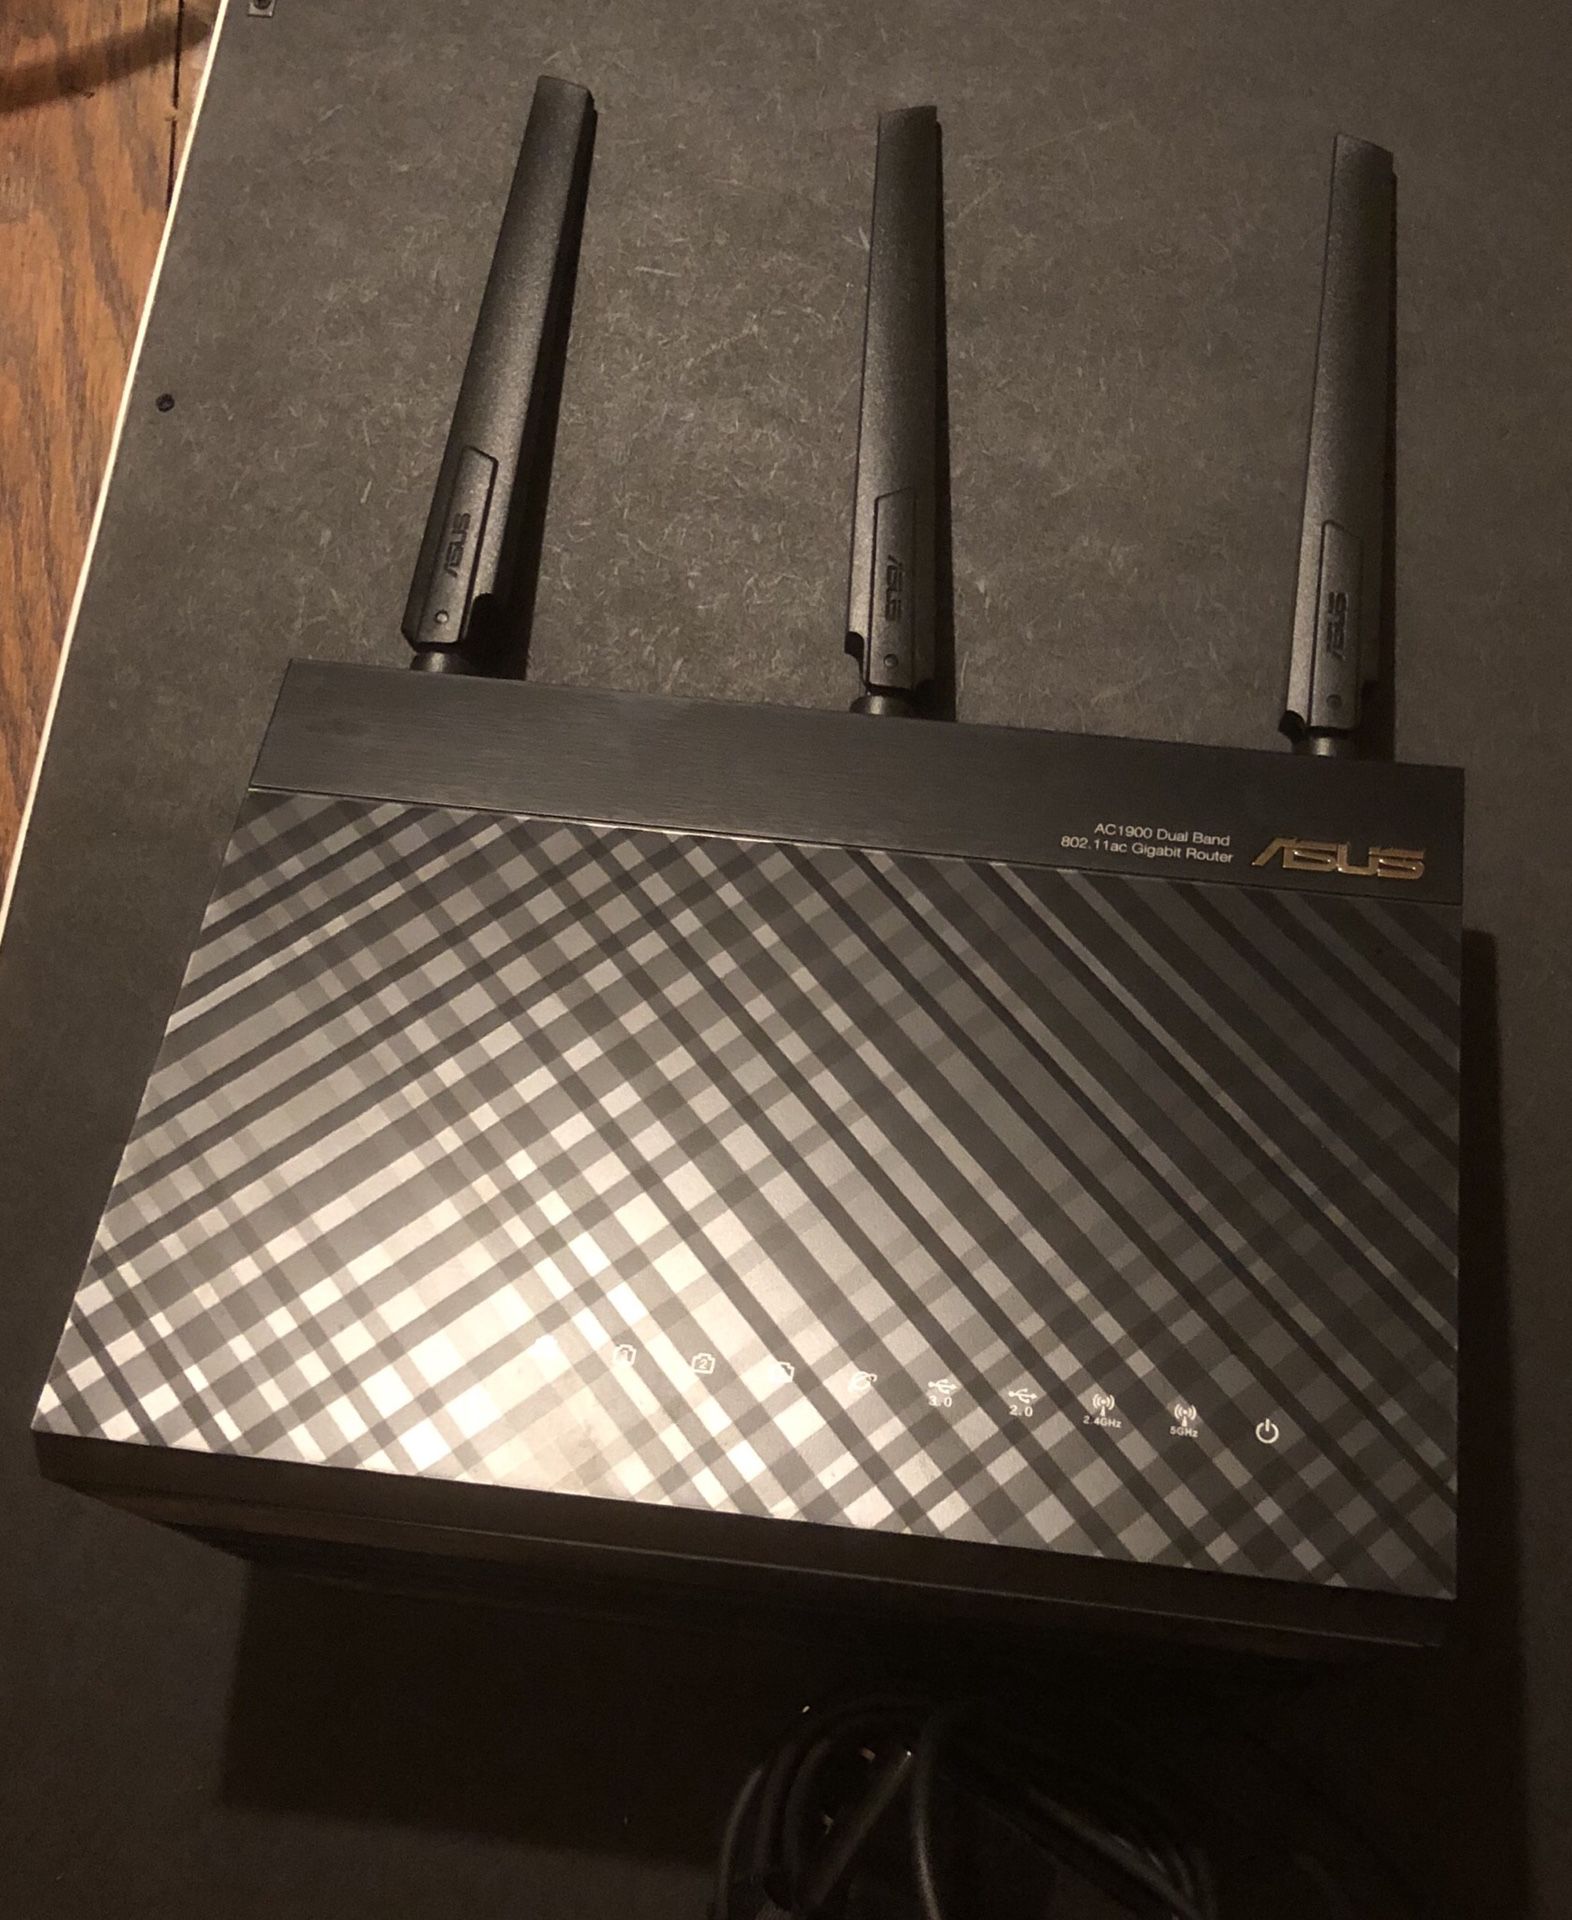 ASUS Router / Linksys extender